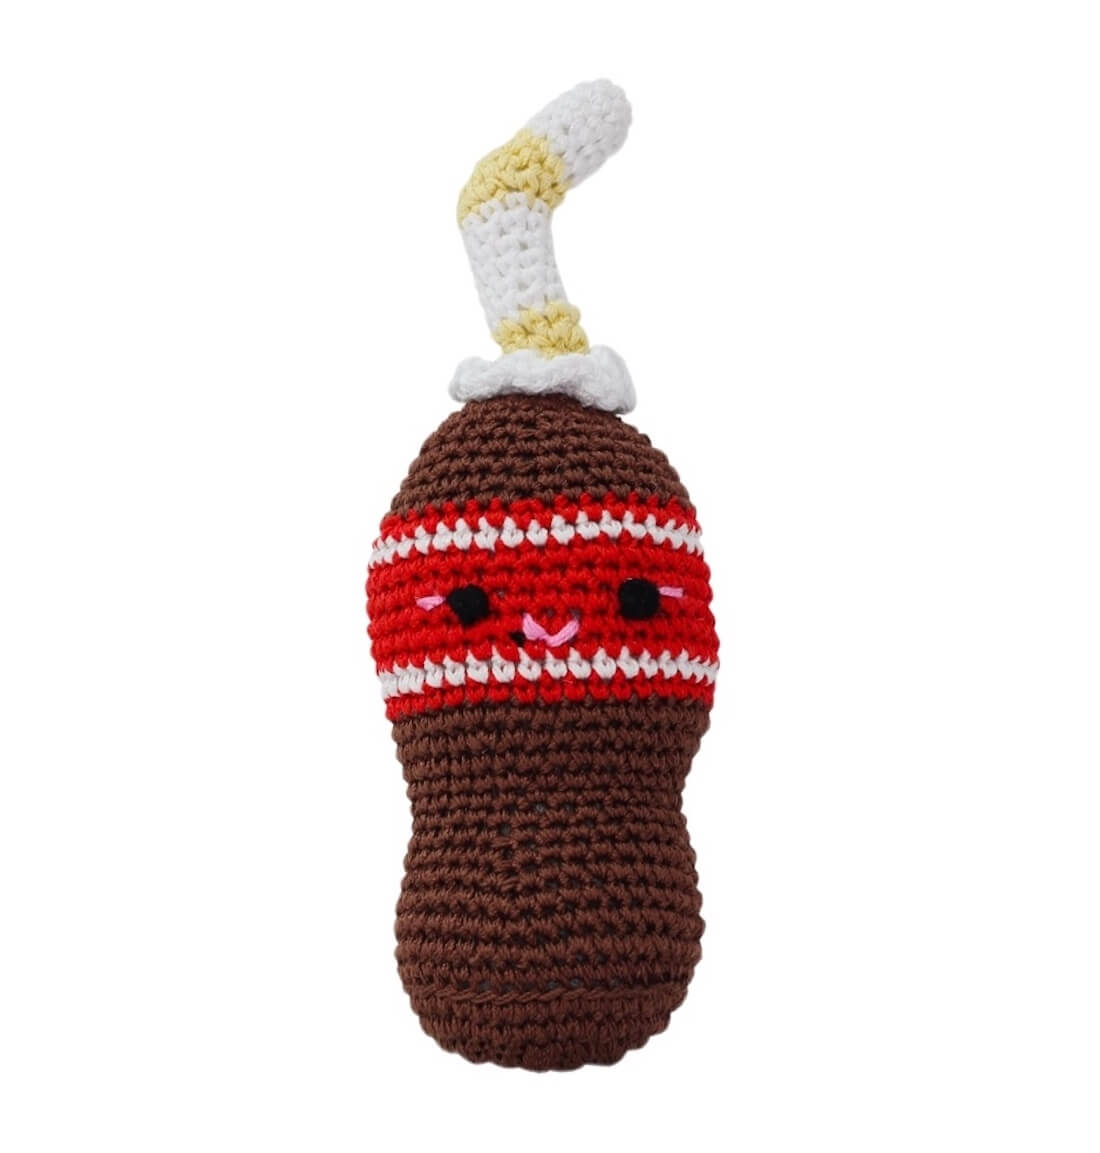 Knit Knacks "Soda Pop Bottle" handmade organic cotton dog toy. Anthropomorphic cola bottle with a smiling face. Has a horizontal red stripe and a white straw coming out of its head.